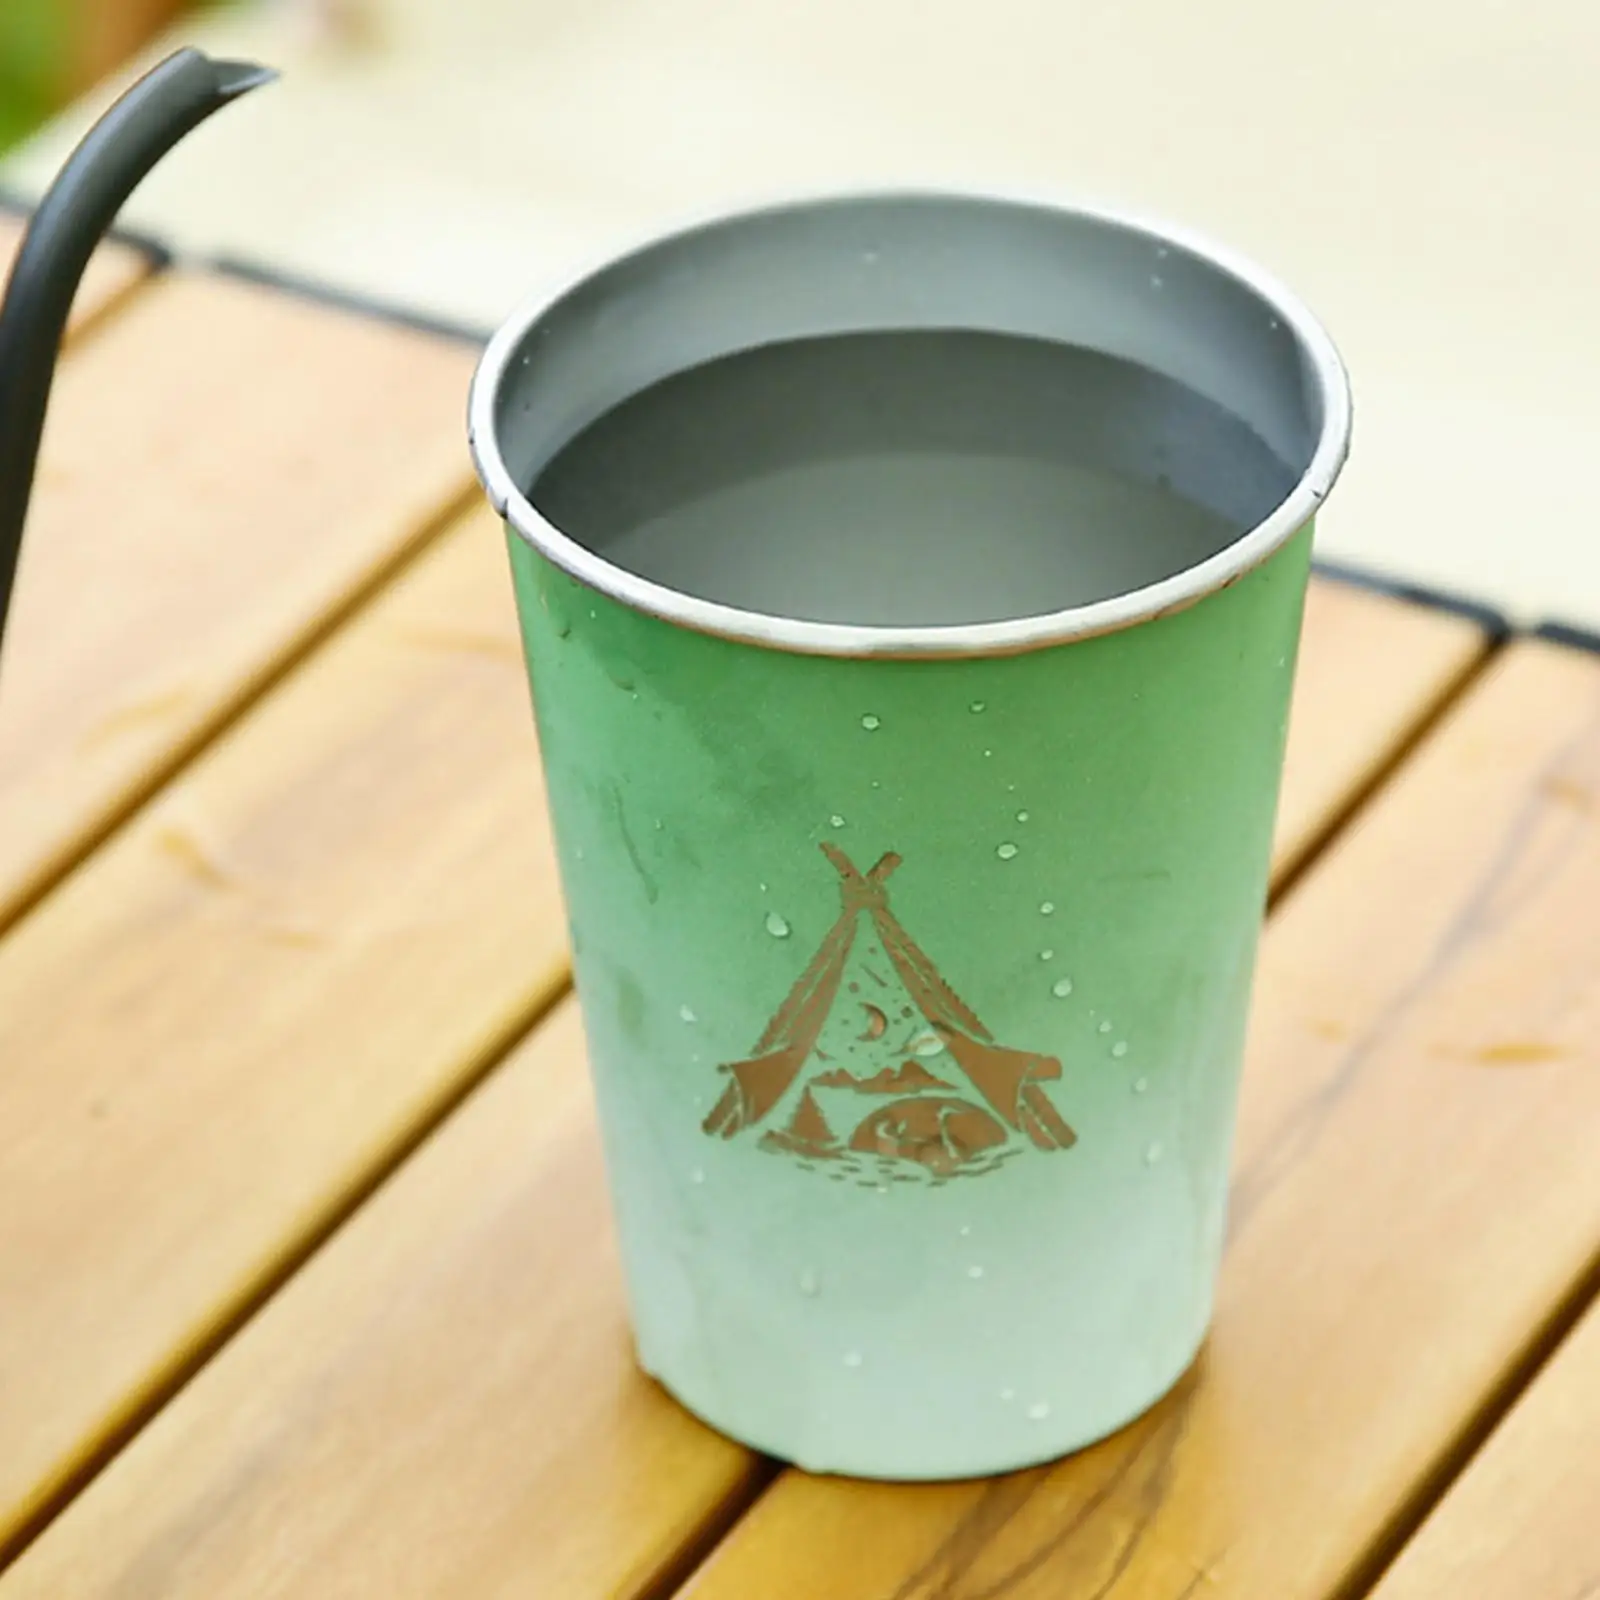 4Pcs Stainless Steel Cup Camping Portable with Bag Water Tumblers for Hiking